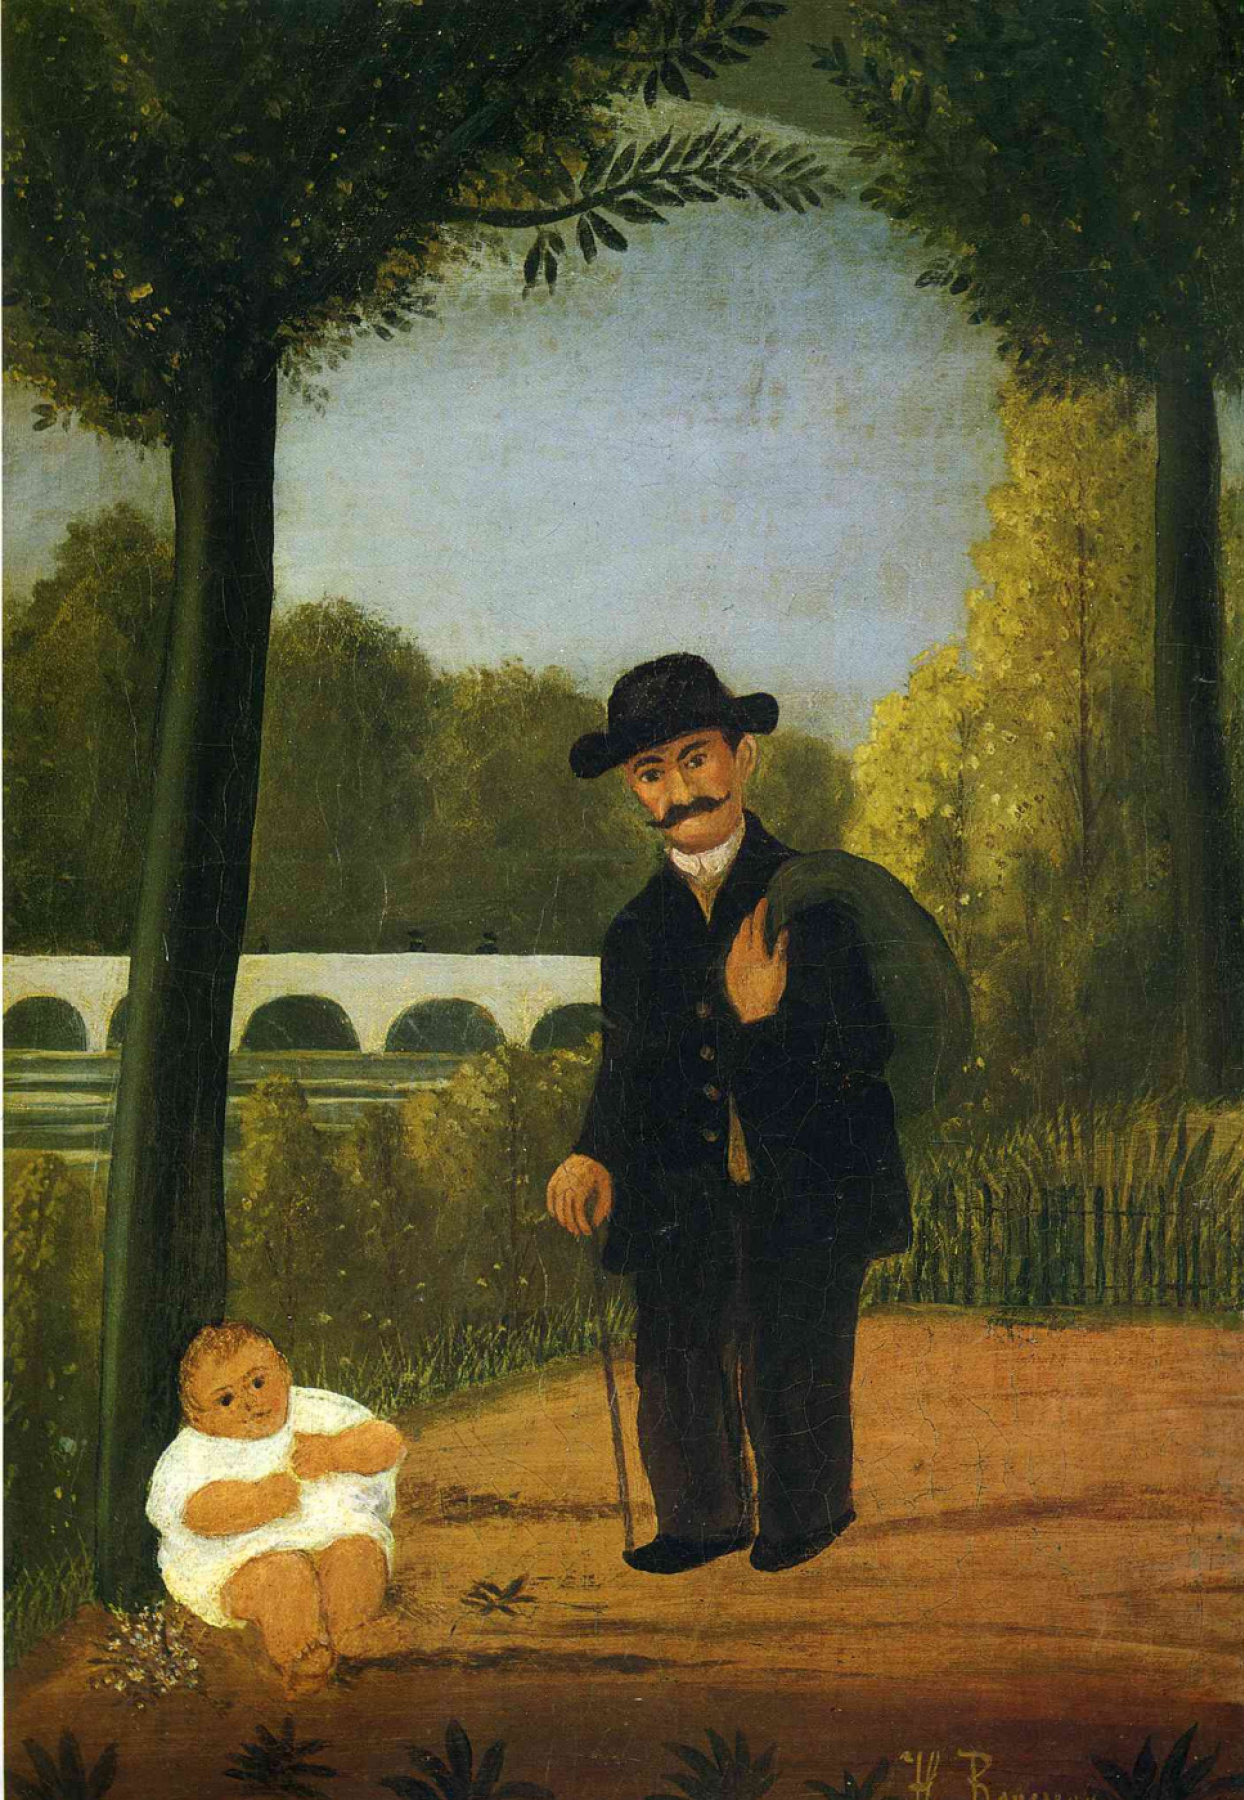 Henri Rousseau. The man and the child